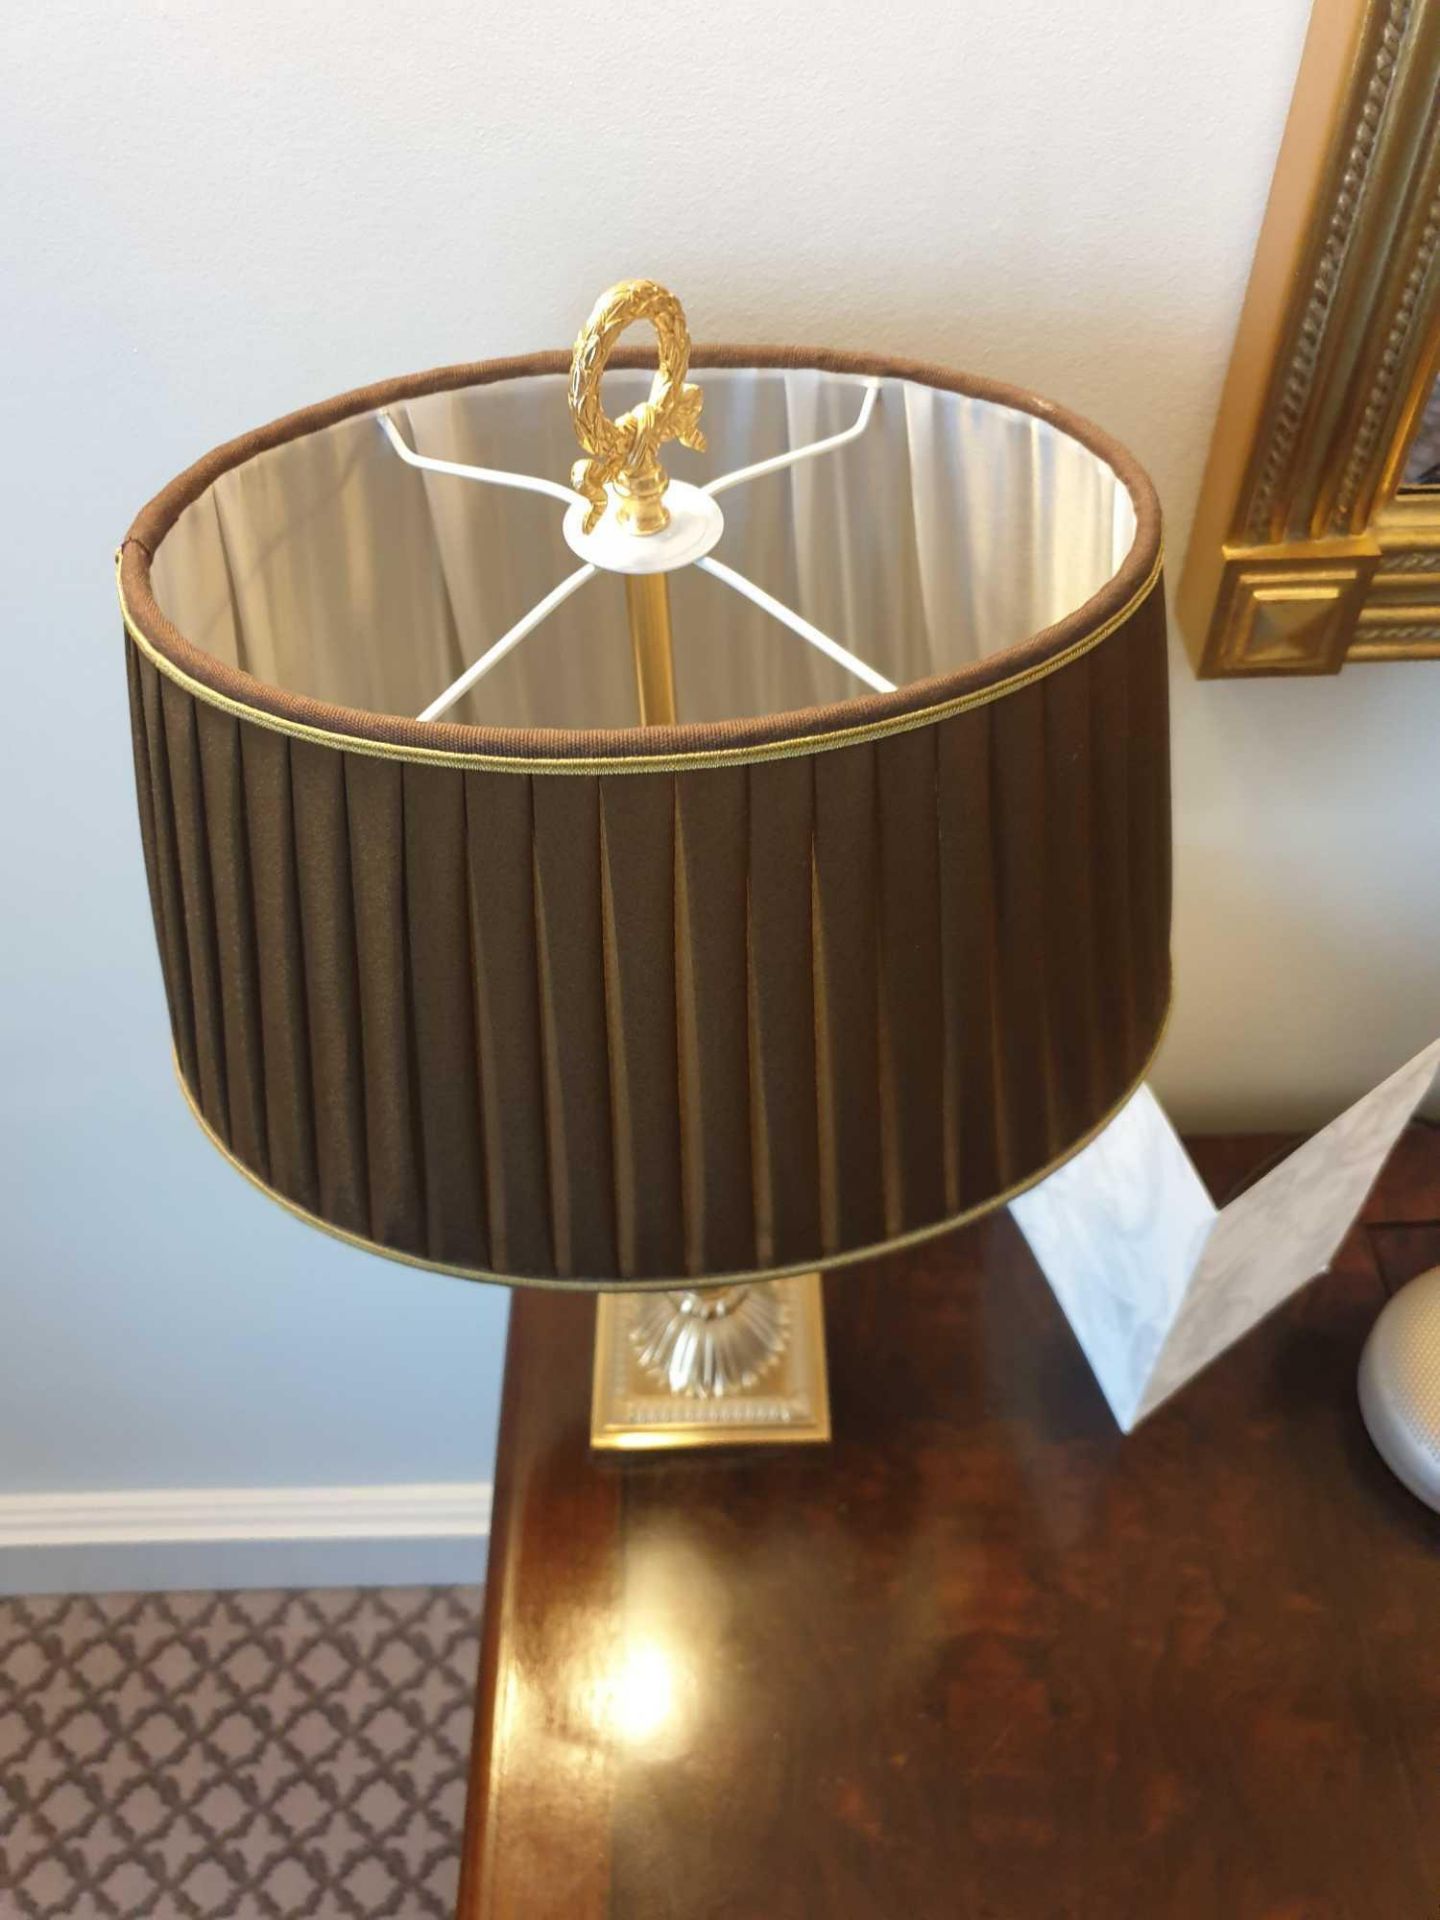 Laudarte Aretusa Twin Arm Table Lamp Bronze Lost-Wax Casting Antique Gilt Bronze Base And Column And - Image 3 of 3